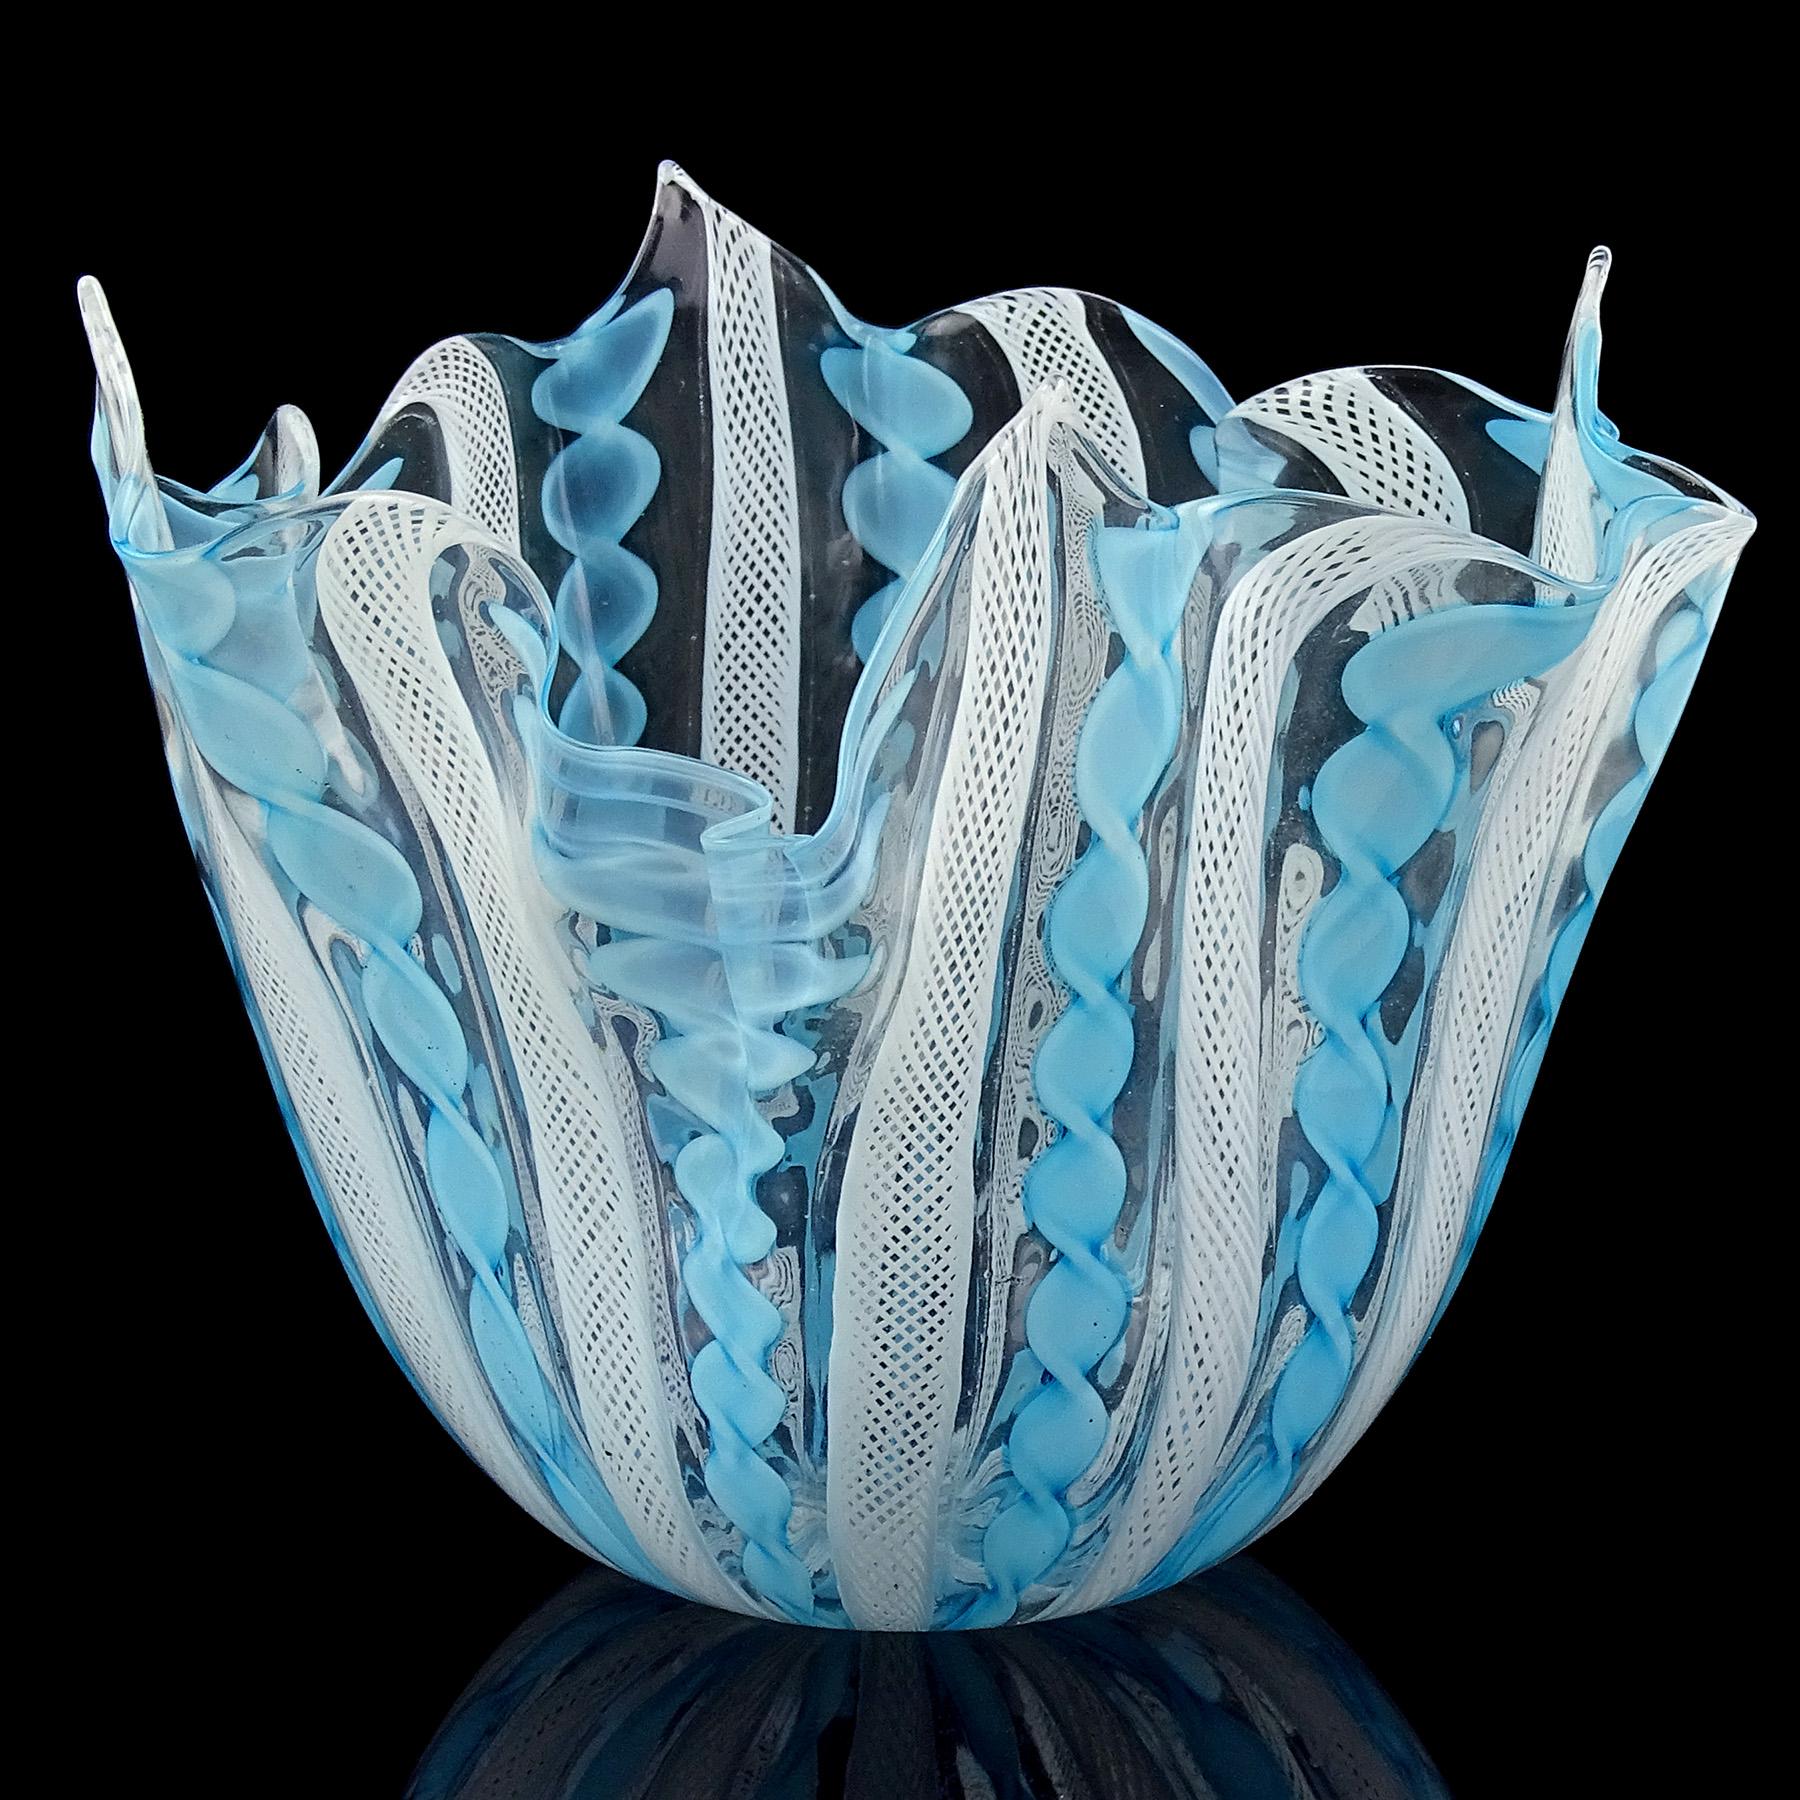 Beautiful vintage Murano hand blown blue and white ribbons Italian art glass handkerchief / fazzoletto vase. Created in the manner of Venini and the Fratelli Toso companies. The vase is made with twisting sky blue Latticino pieces and white net